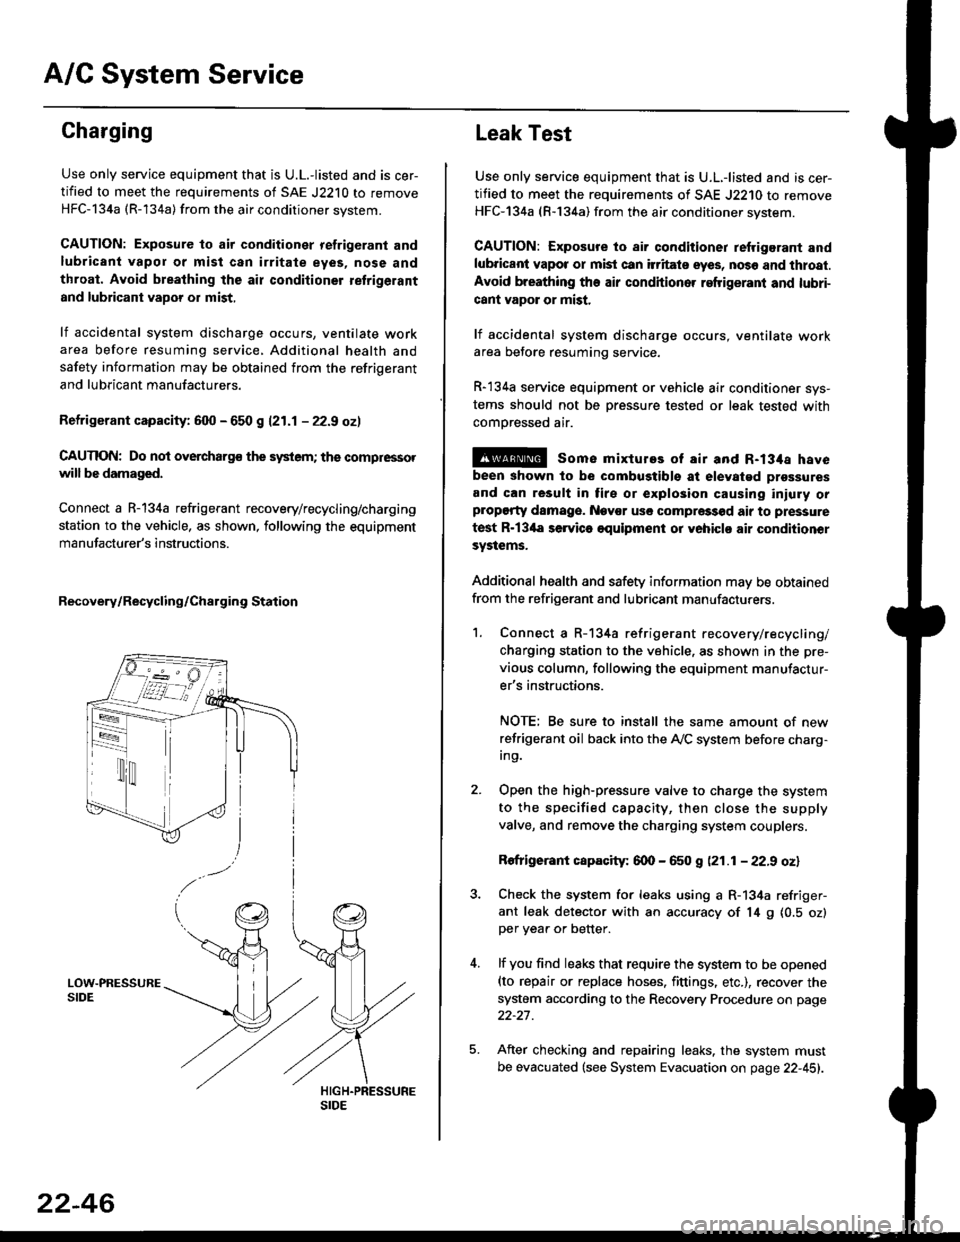 HONDA CIVIC 1998 6.G User Guide A/C System Service
Charging
Use only service equipment that is U.L.-listed and is cer-
tified to meet the requirements of SAE J2210 to remove
HFC-134a (R-134a) from the air conditioner system.
CAUTION